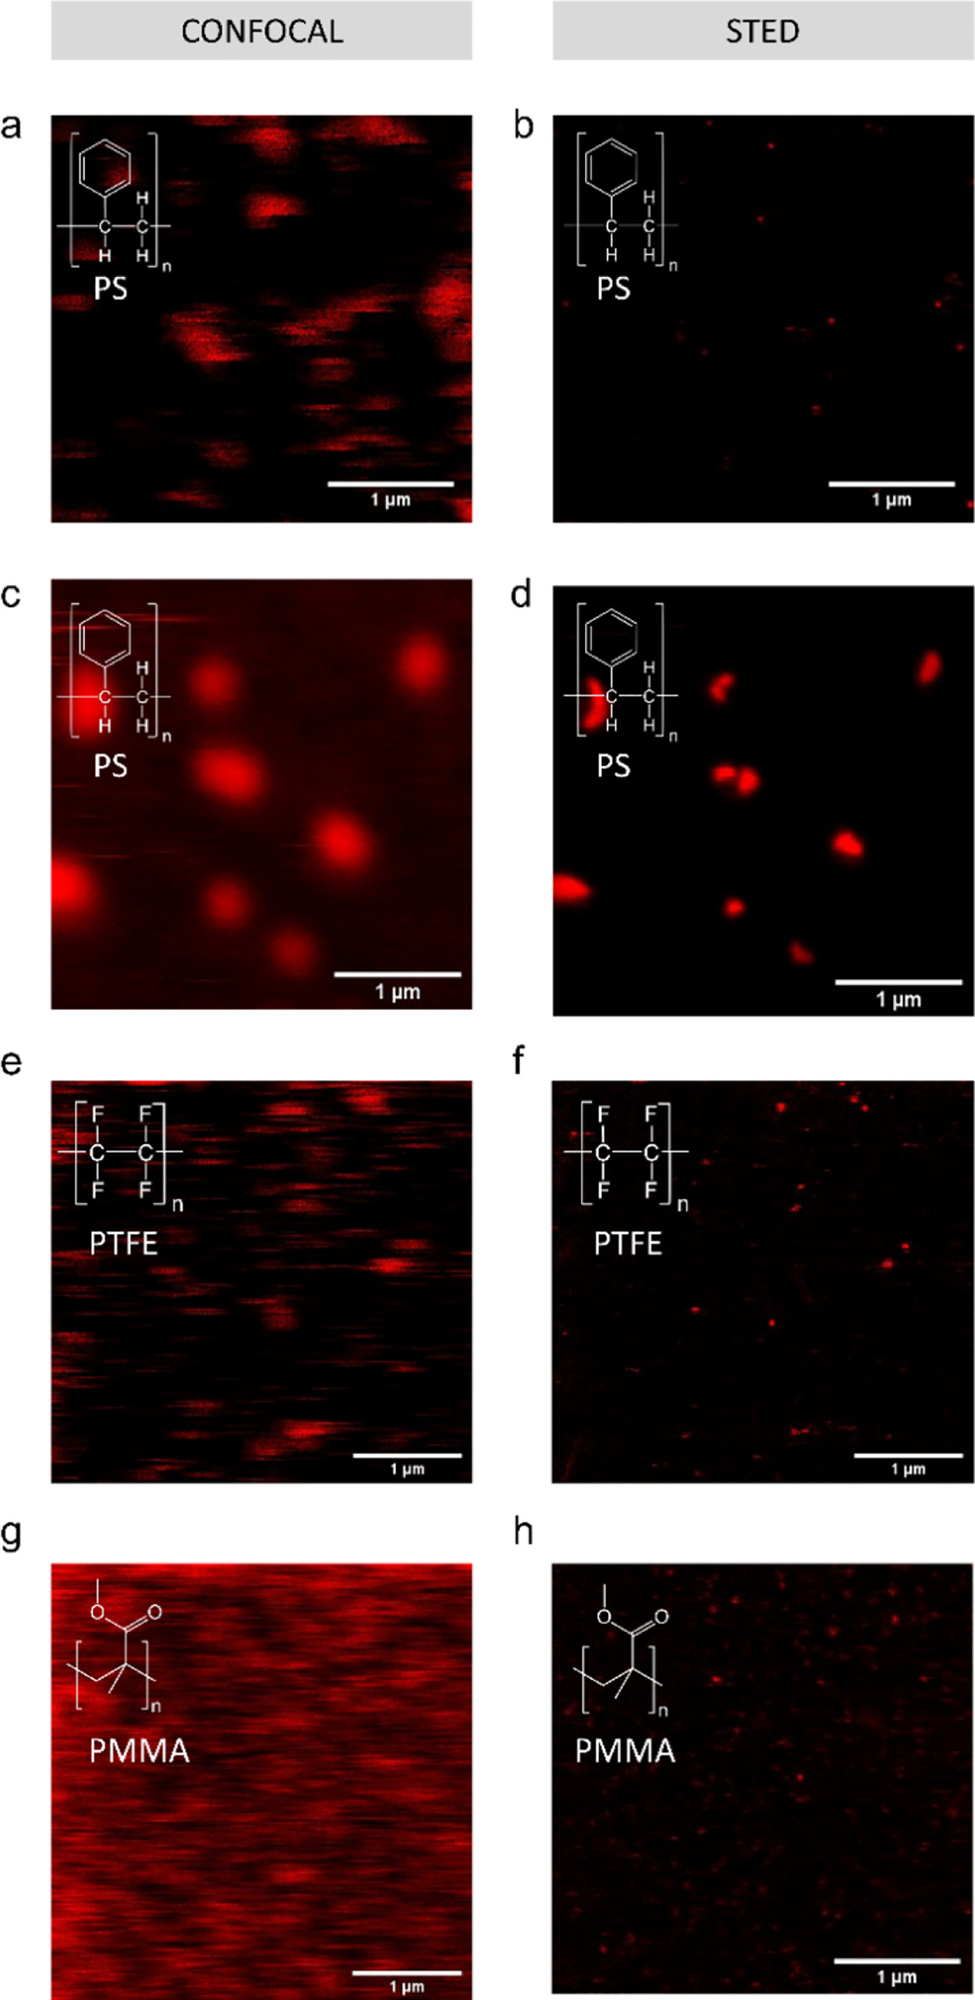 Passive labeling and fluorescent imaging of various nanoplastic types with Atto 647N. Confocal (a) and STED (b) images of debris released from an expanded polystyrene plate exposed to 90 °C in DI water; (c) confocal and (d) STED image of sanding debris from a polystyrene Petri dish; (e) confocal and (f) STED images of PTFE particles; and (g) confocal and (h) STED images of PMMA particles. Confocal and STED images are of the same field of view.